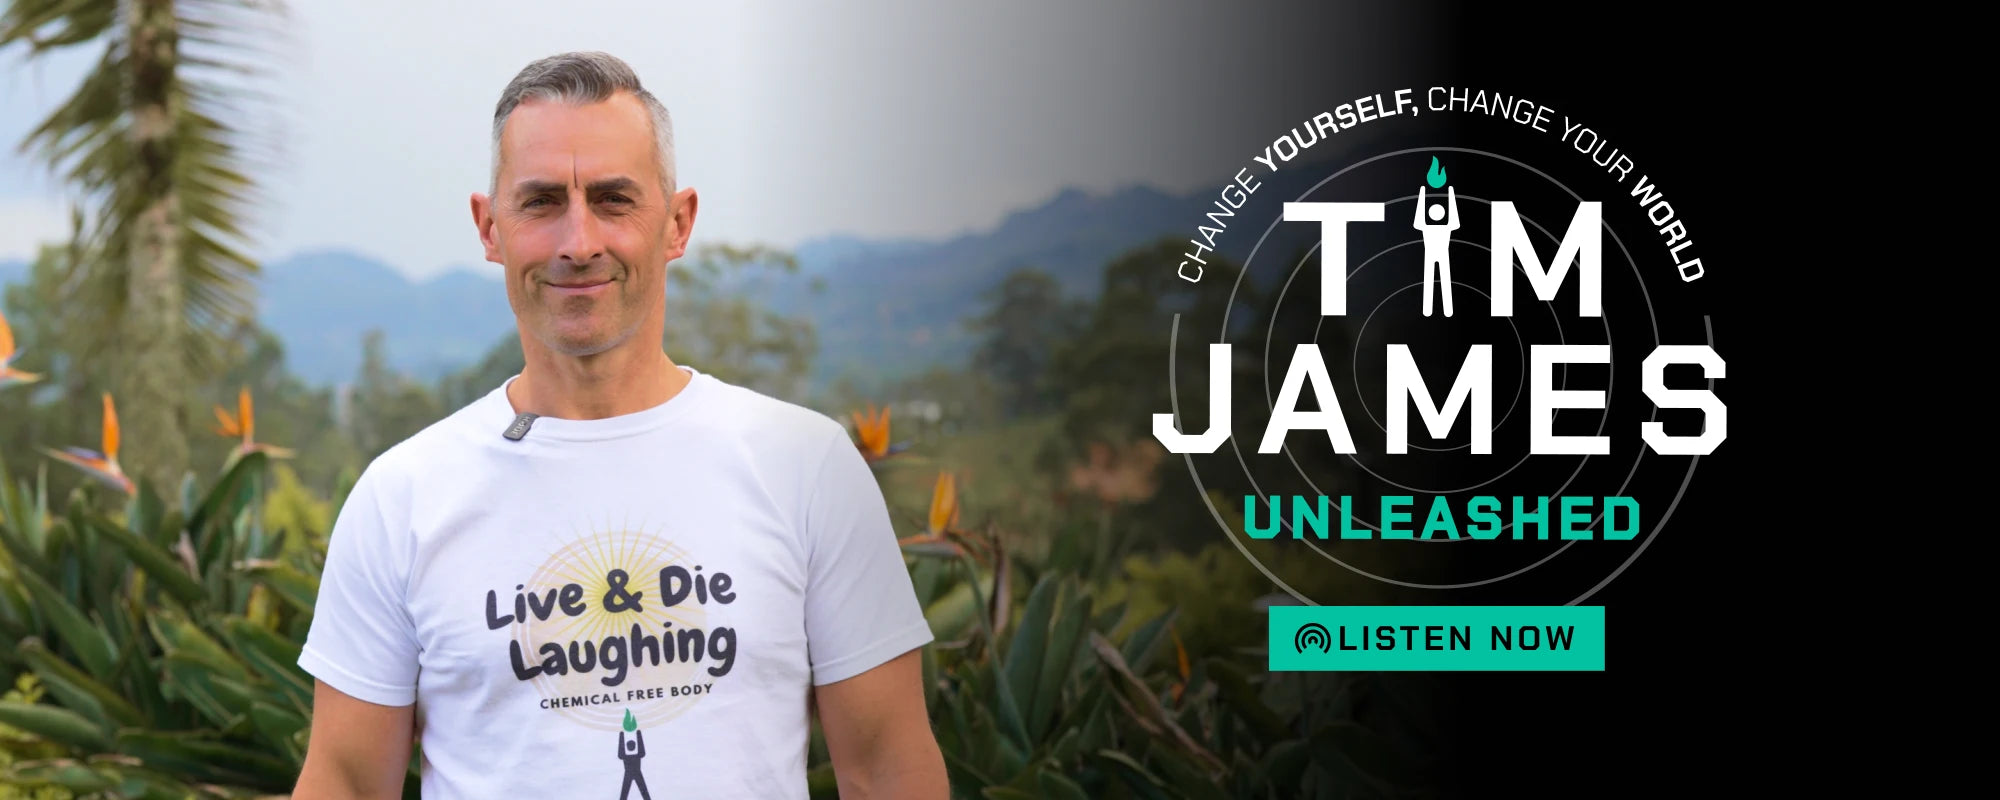 tim-james-unleashed-podcast.webp__PID:c73a6a3e-5867-4d67-a323-dbee5e2f8be4